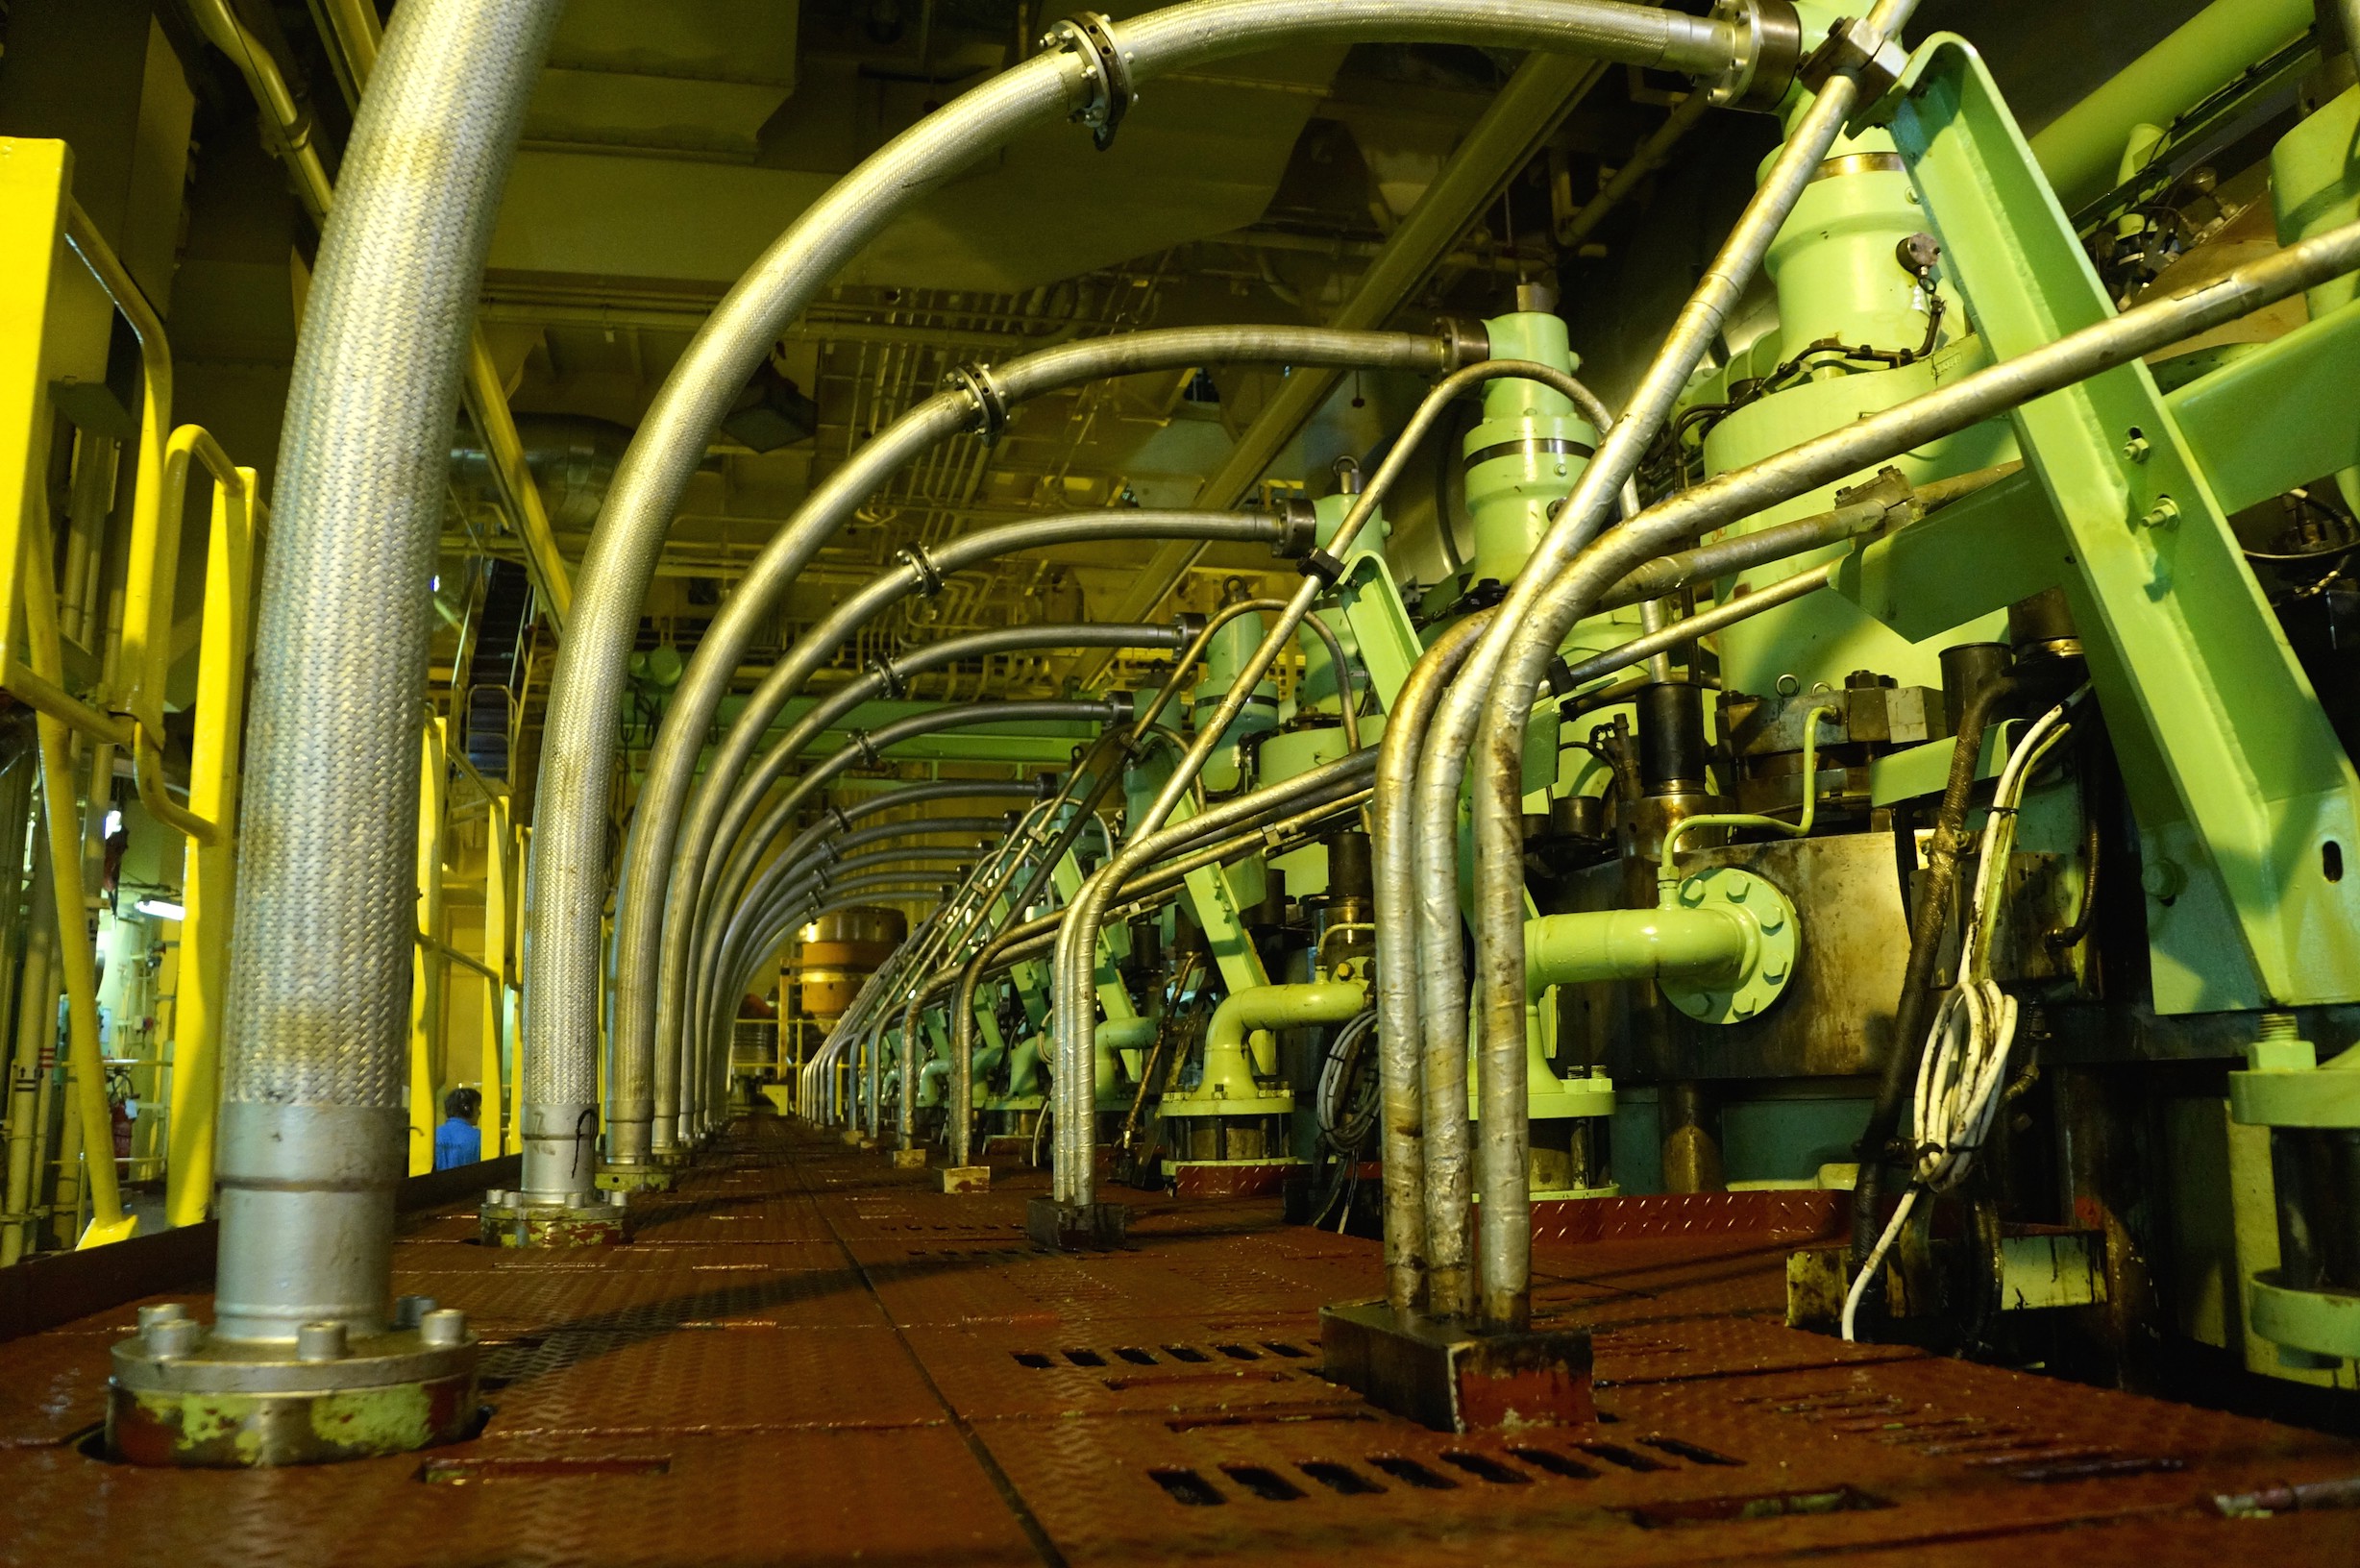 Pipes and other machinery fill the engine room.